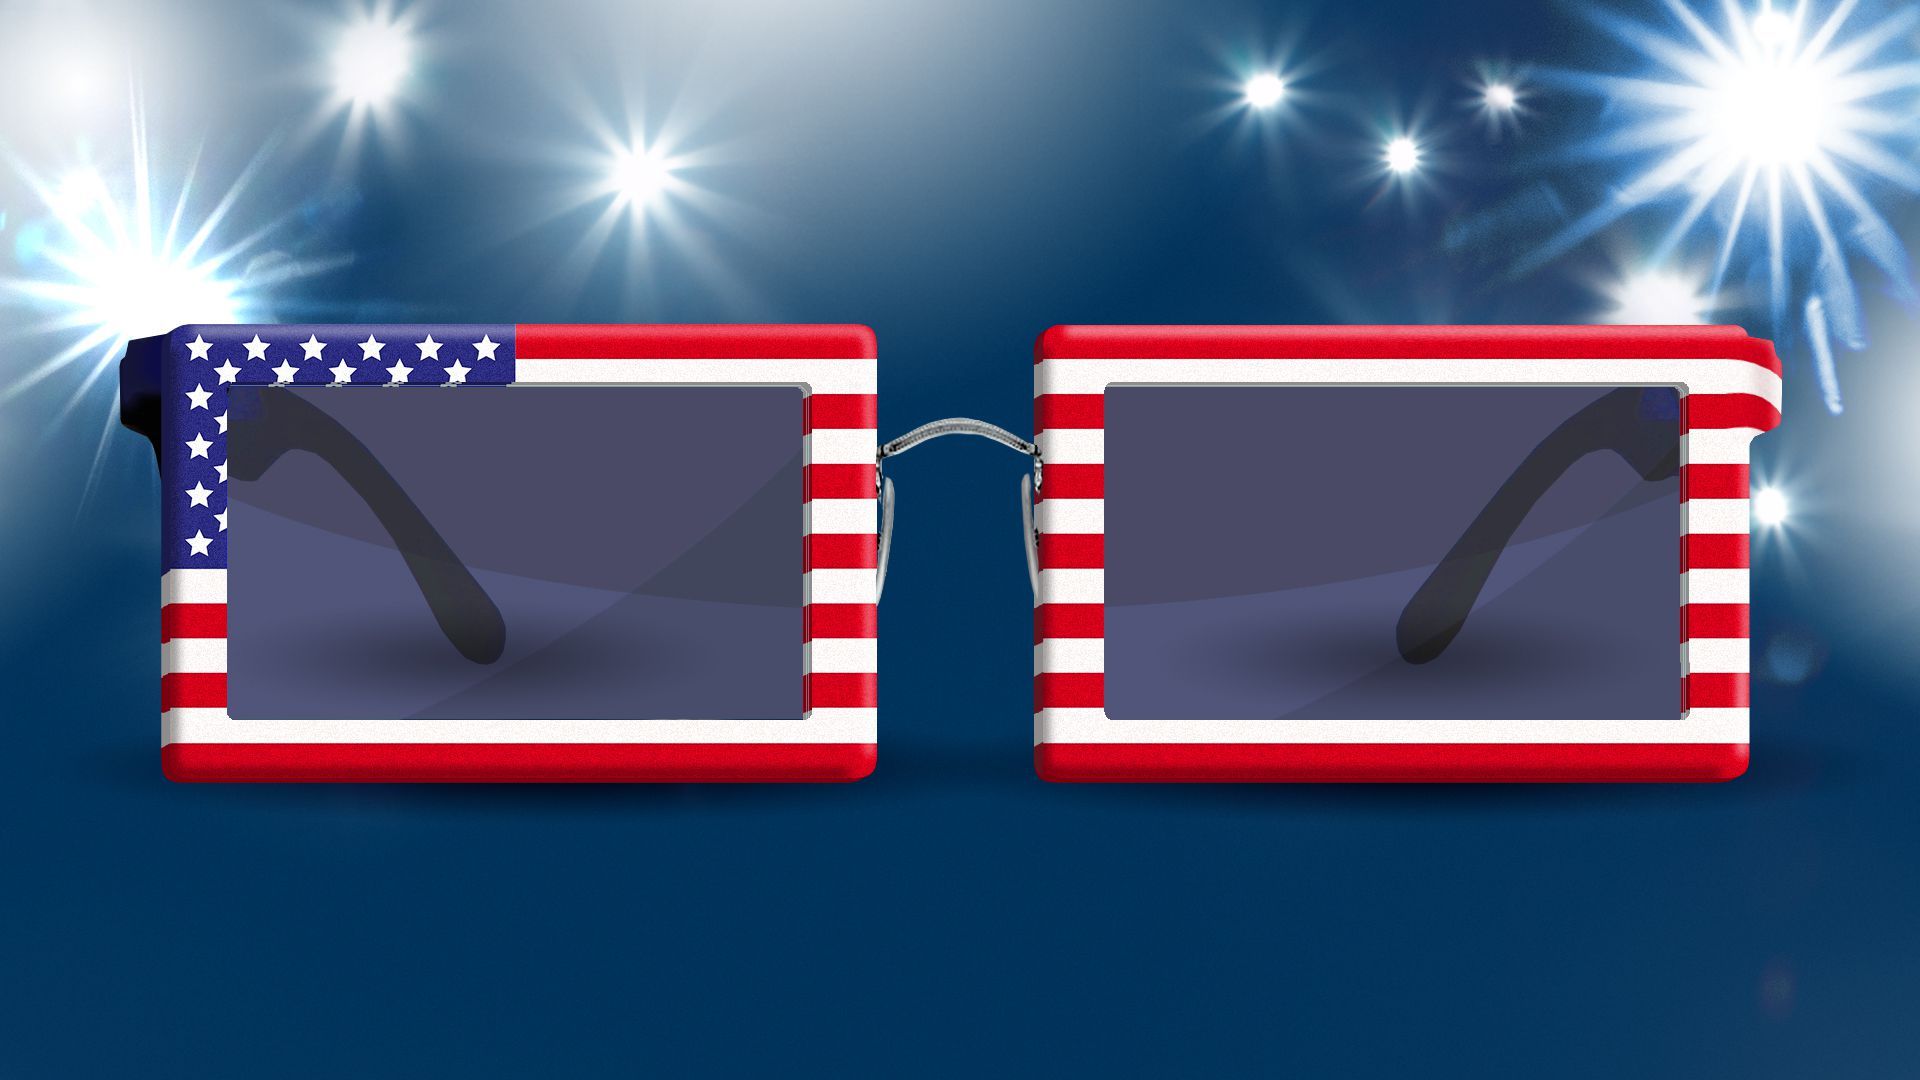 Illustration of sunglasses with U.S. flag frames surrounded by camera flashes